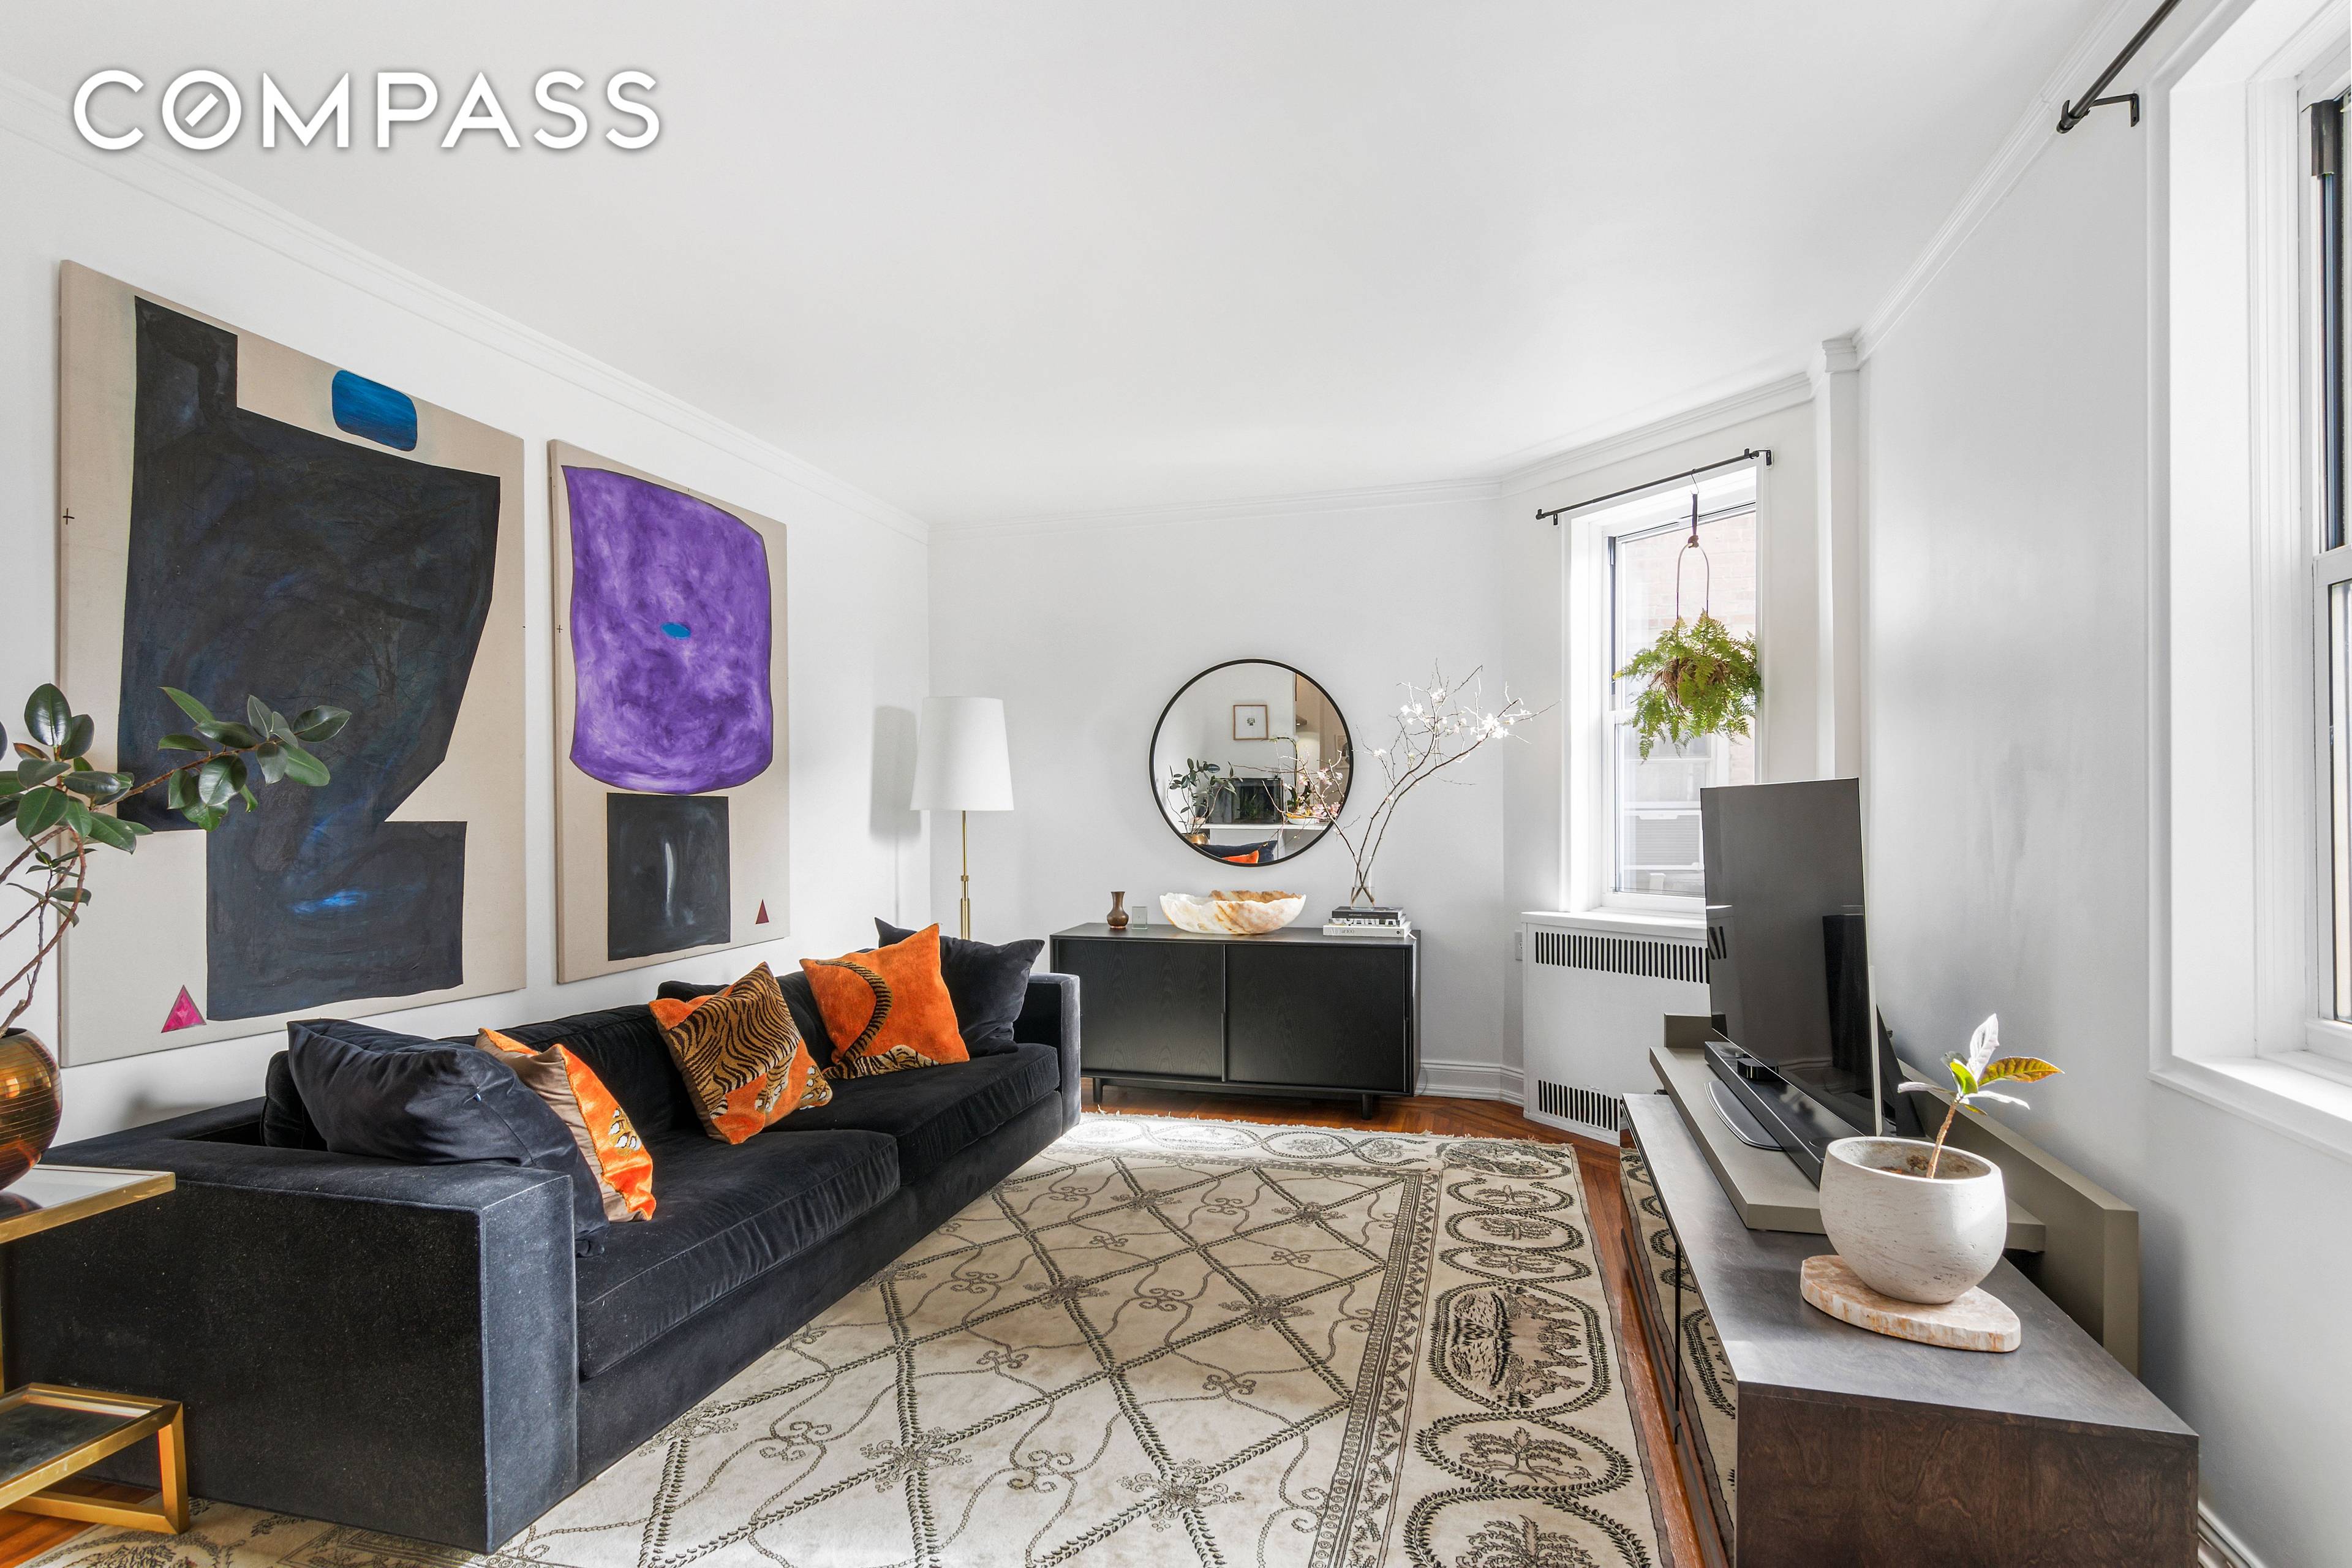 Large, quiet fully gut renovated corner 1 bedroom located in one of the most well maintained and most sought after pre war buildings in charming Windsor Terrace.